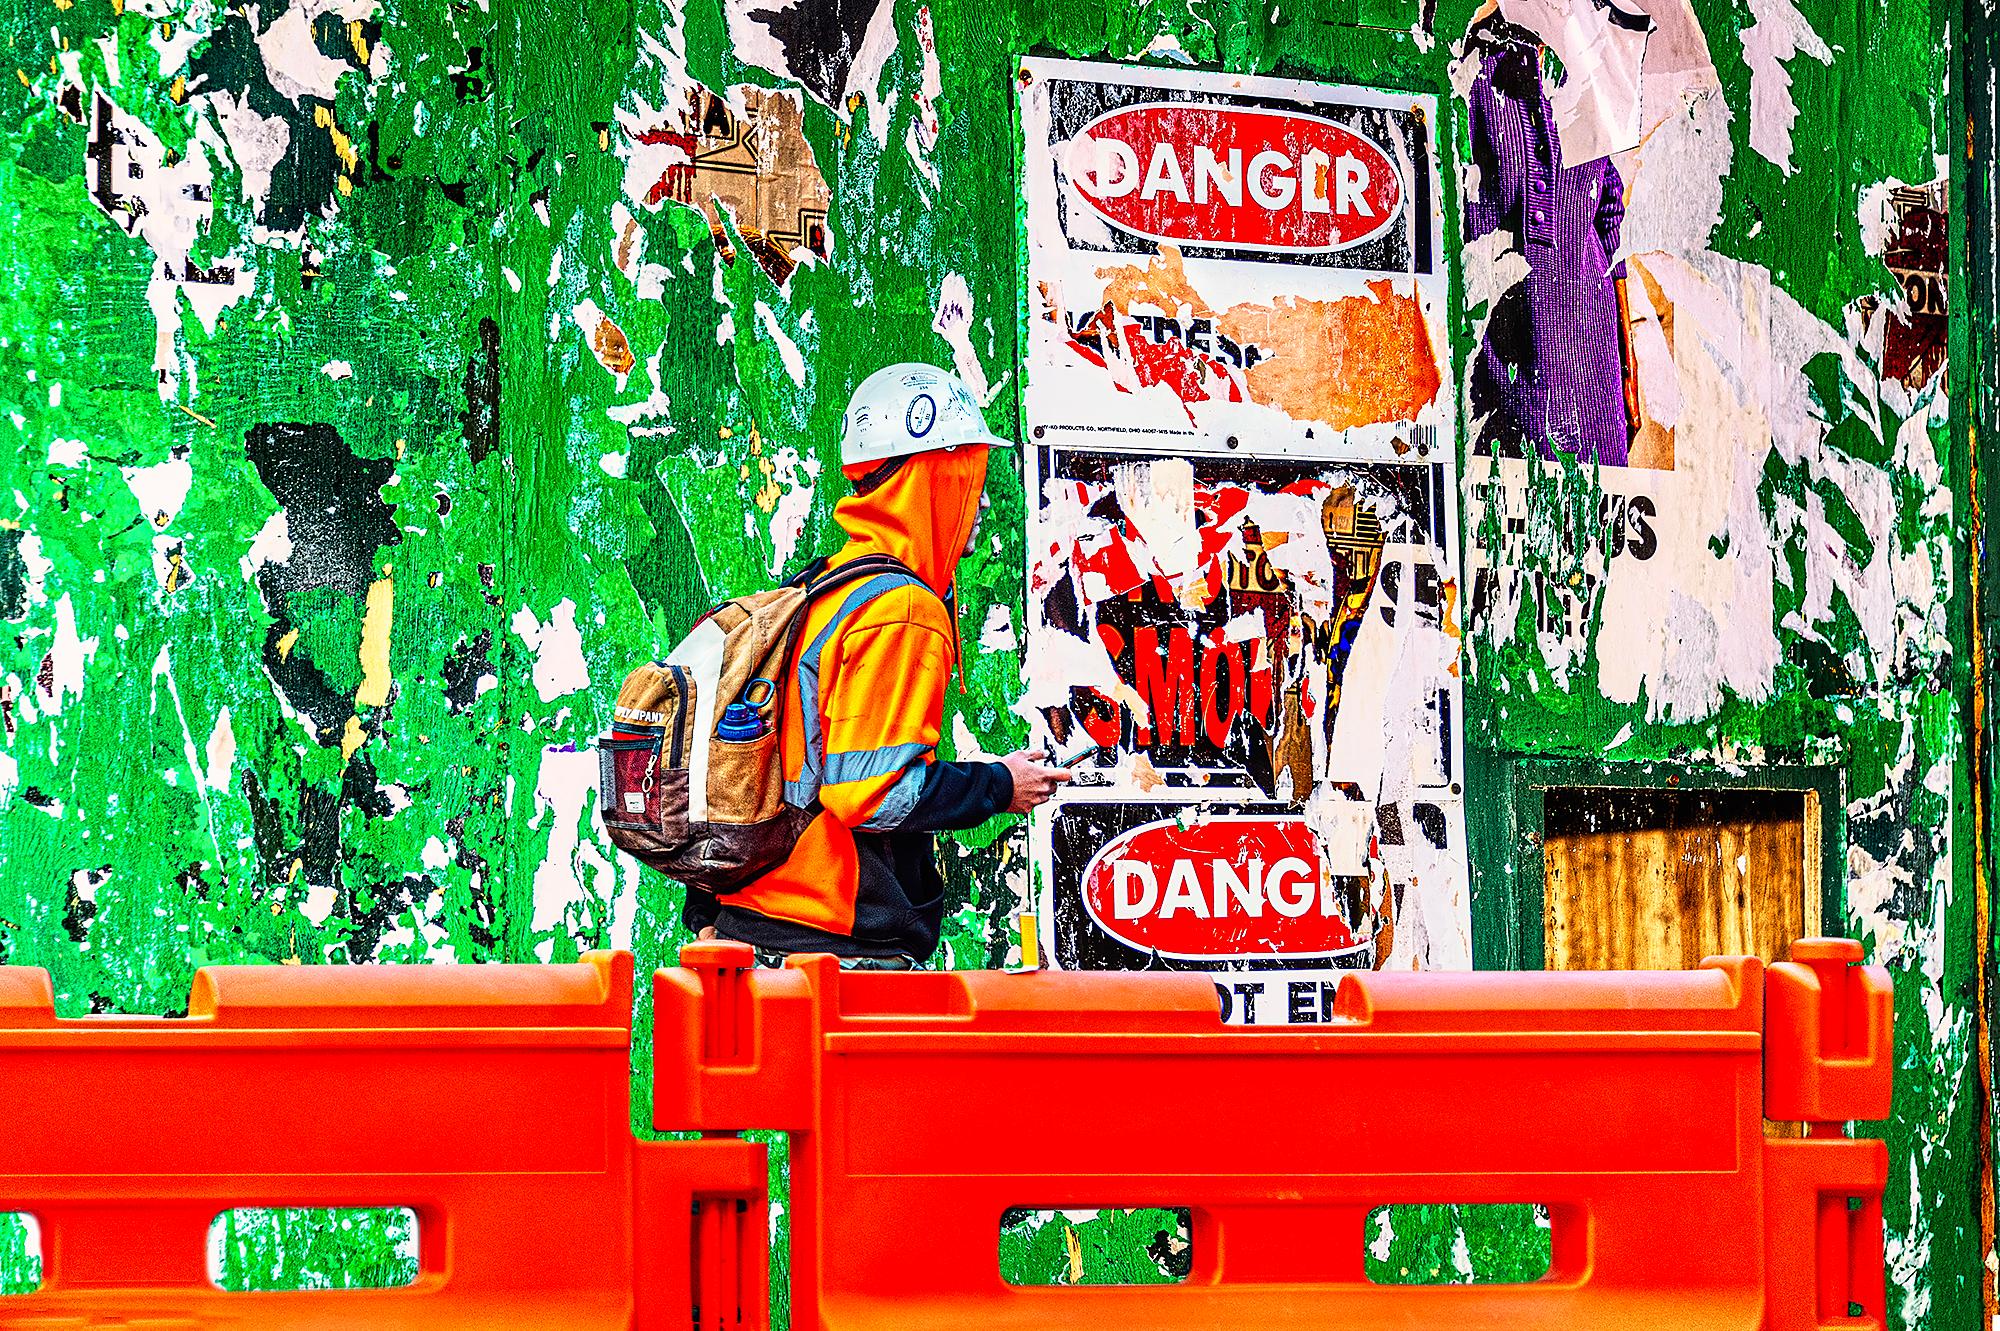 Mitchell Funk Landscape Photograph - Graffiti Street Art Photograph  in Red and Green